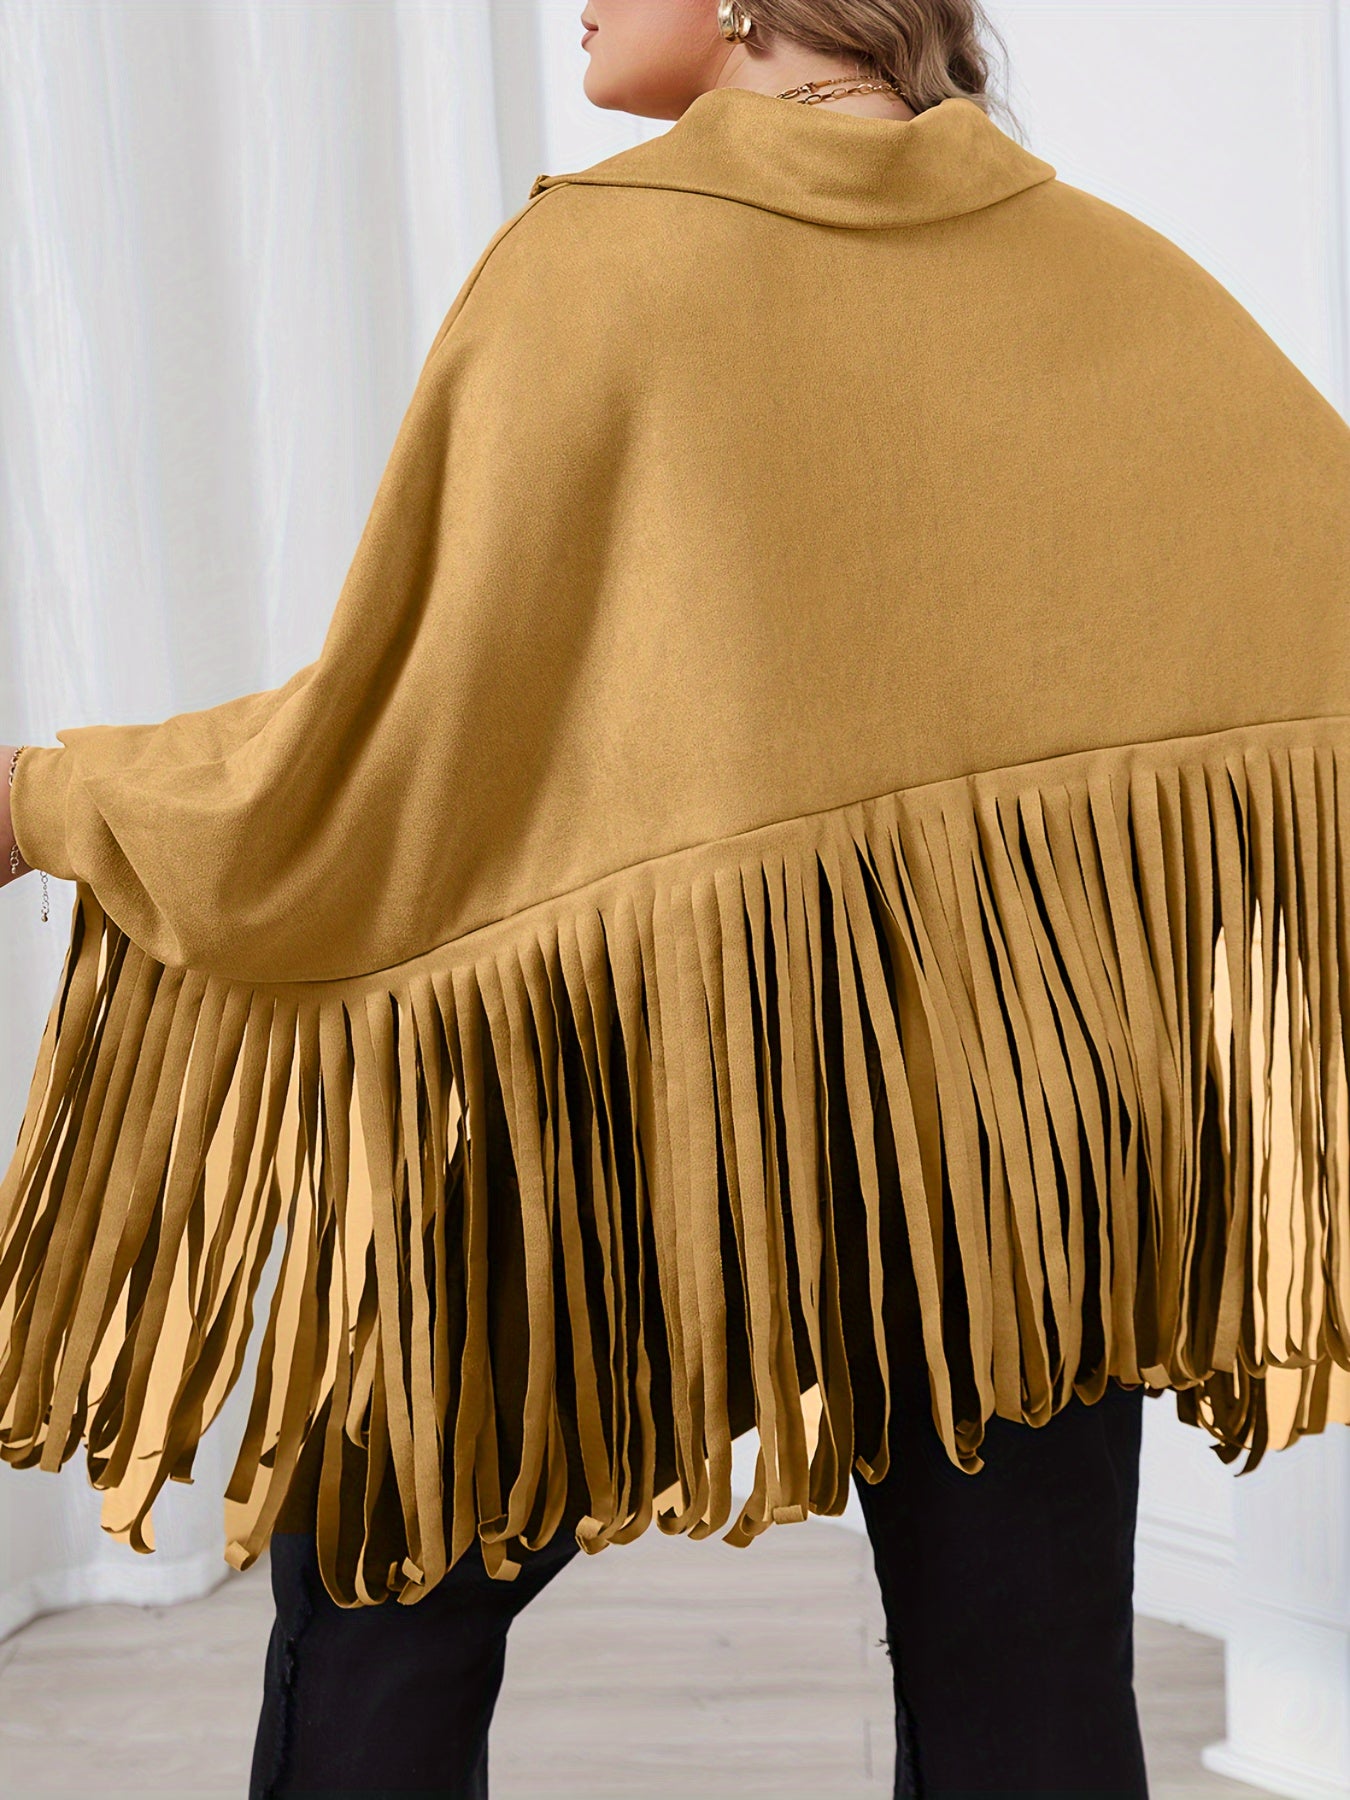 A person wearing a mustard-colored, fringed Maramalive™ Women's Plus Solid Batwing Sleeve Mock Neck Fringe Trim Cloak Top with batwing sleeves, viewed from the back, with white curtains in the background. Perfect for Fall/Winter.